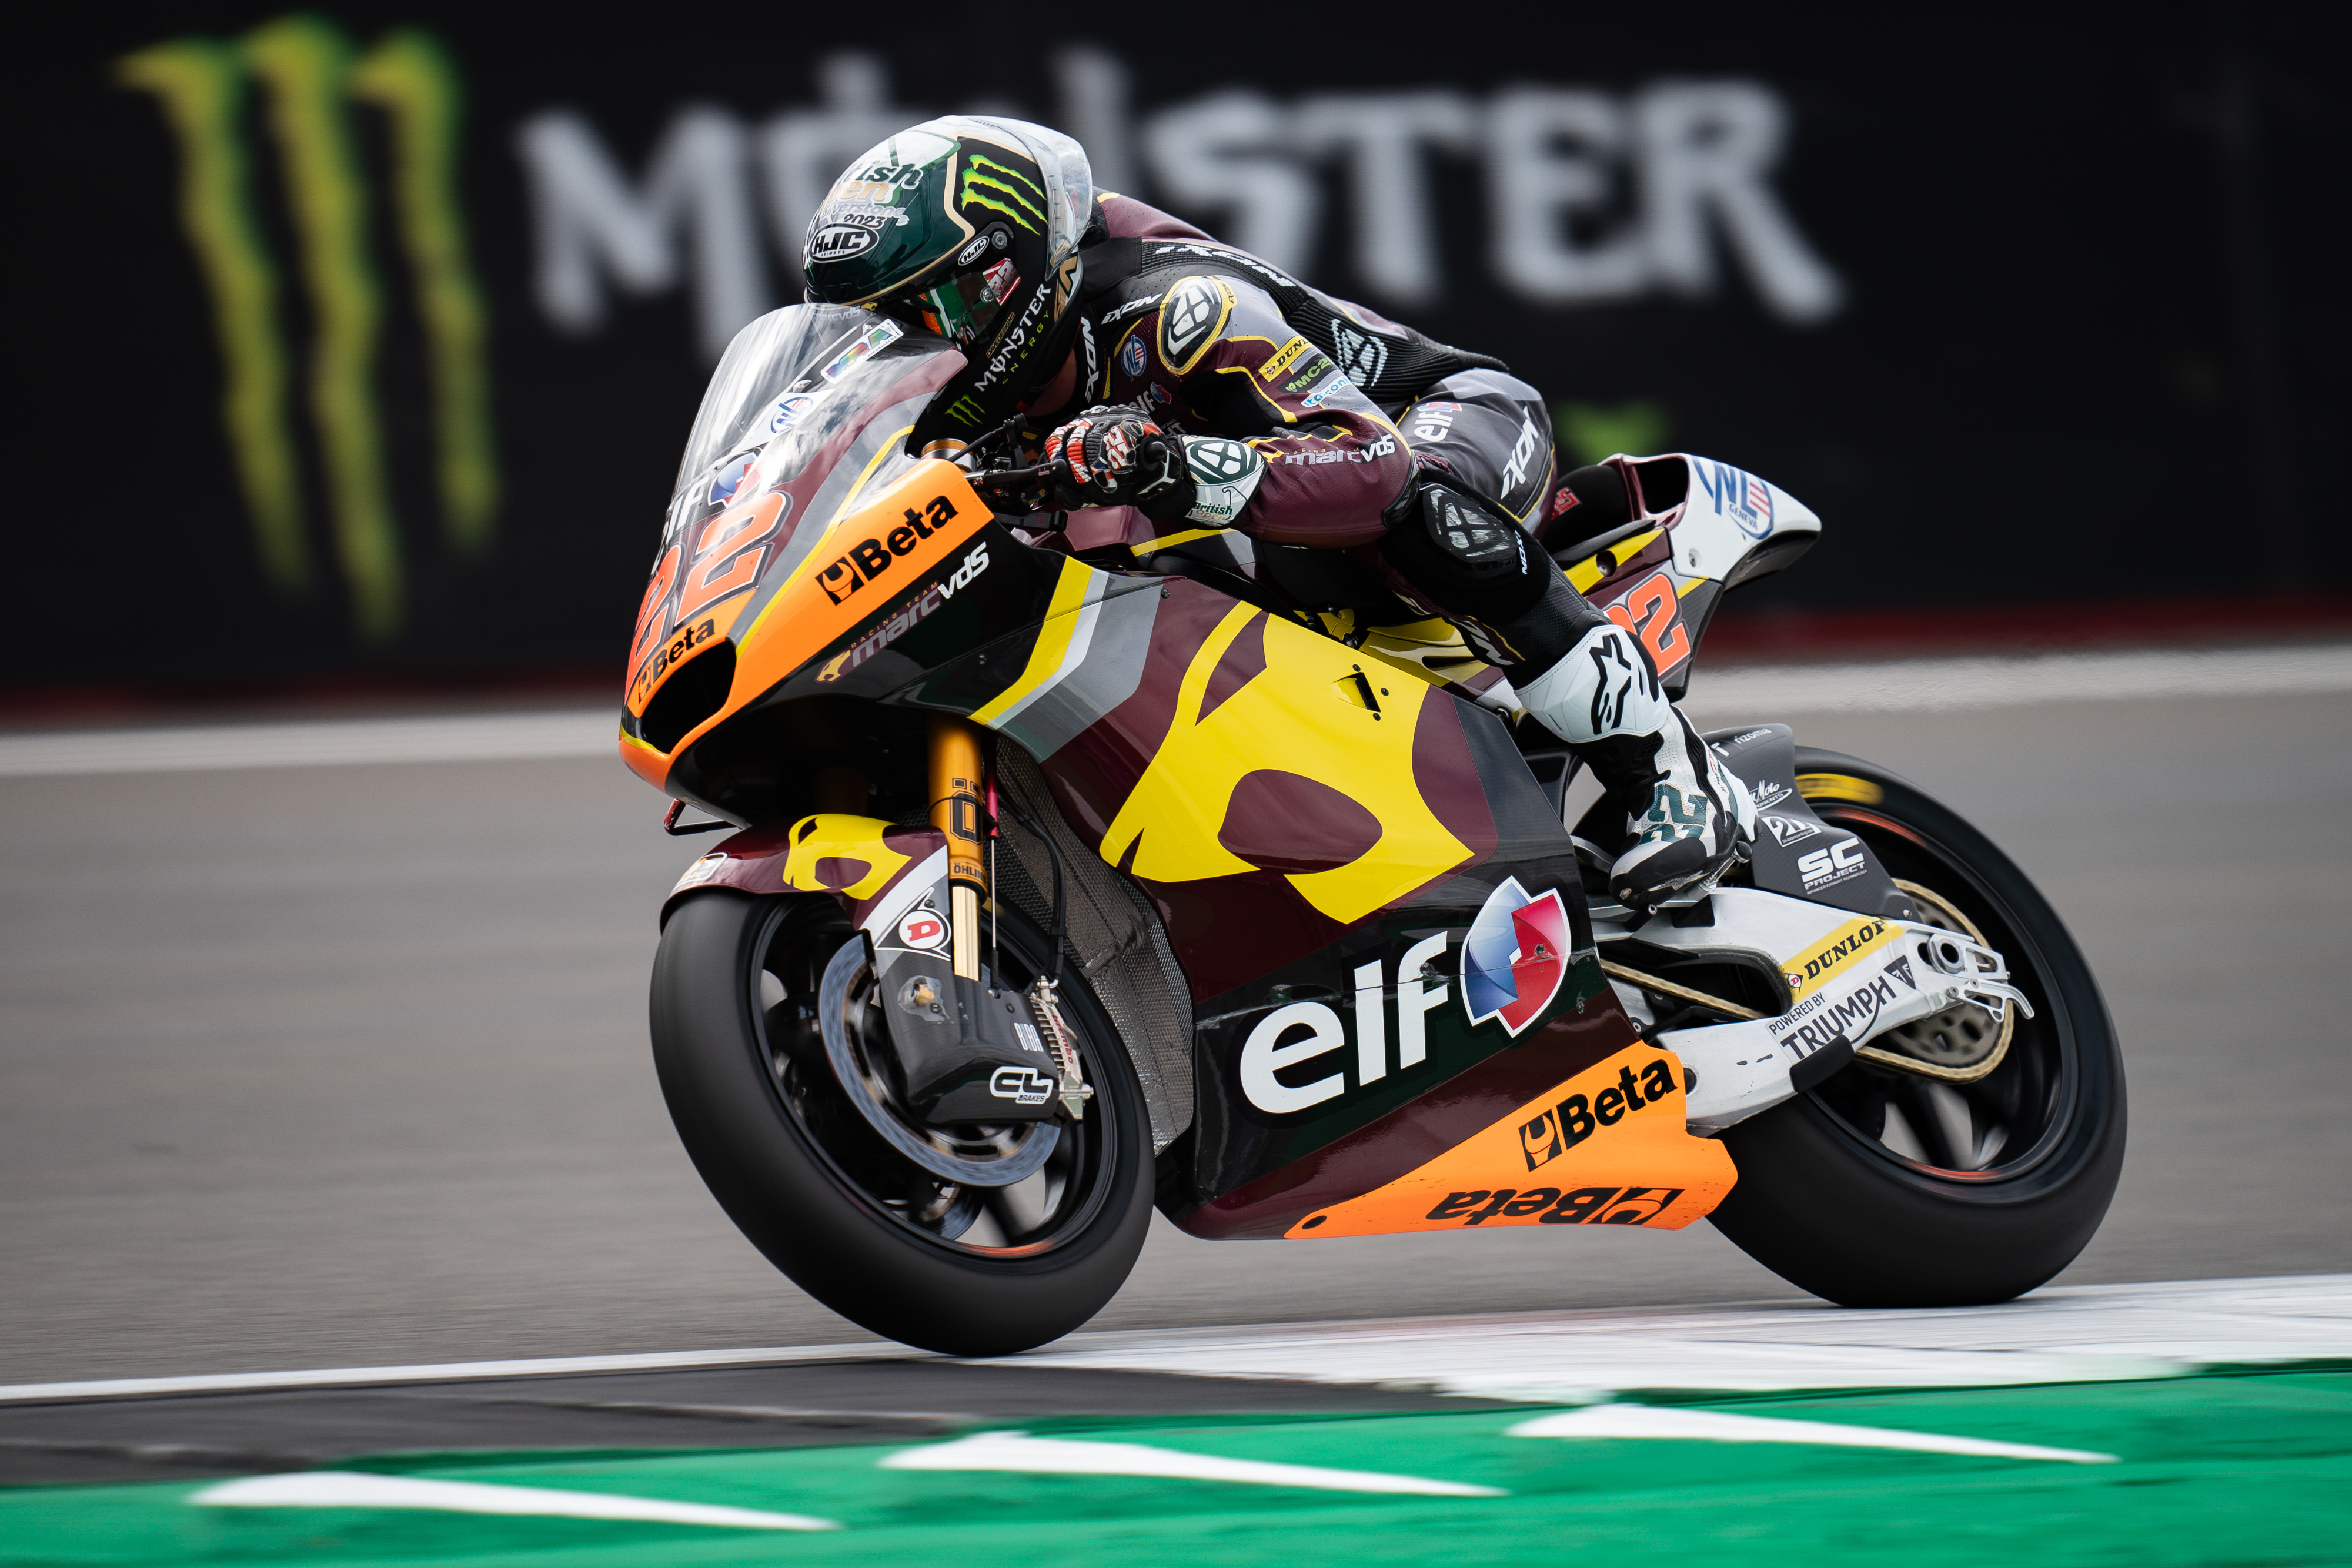 launches fightback GP - home Racing ELF Marc Lowes VDS Team heroic at final